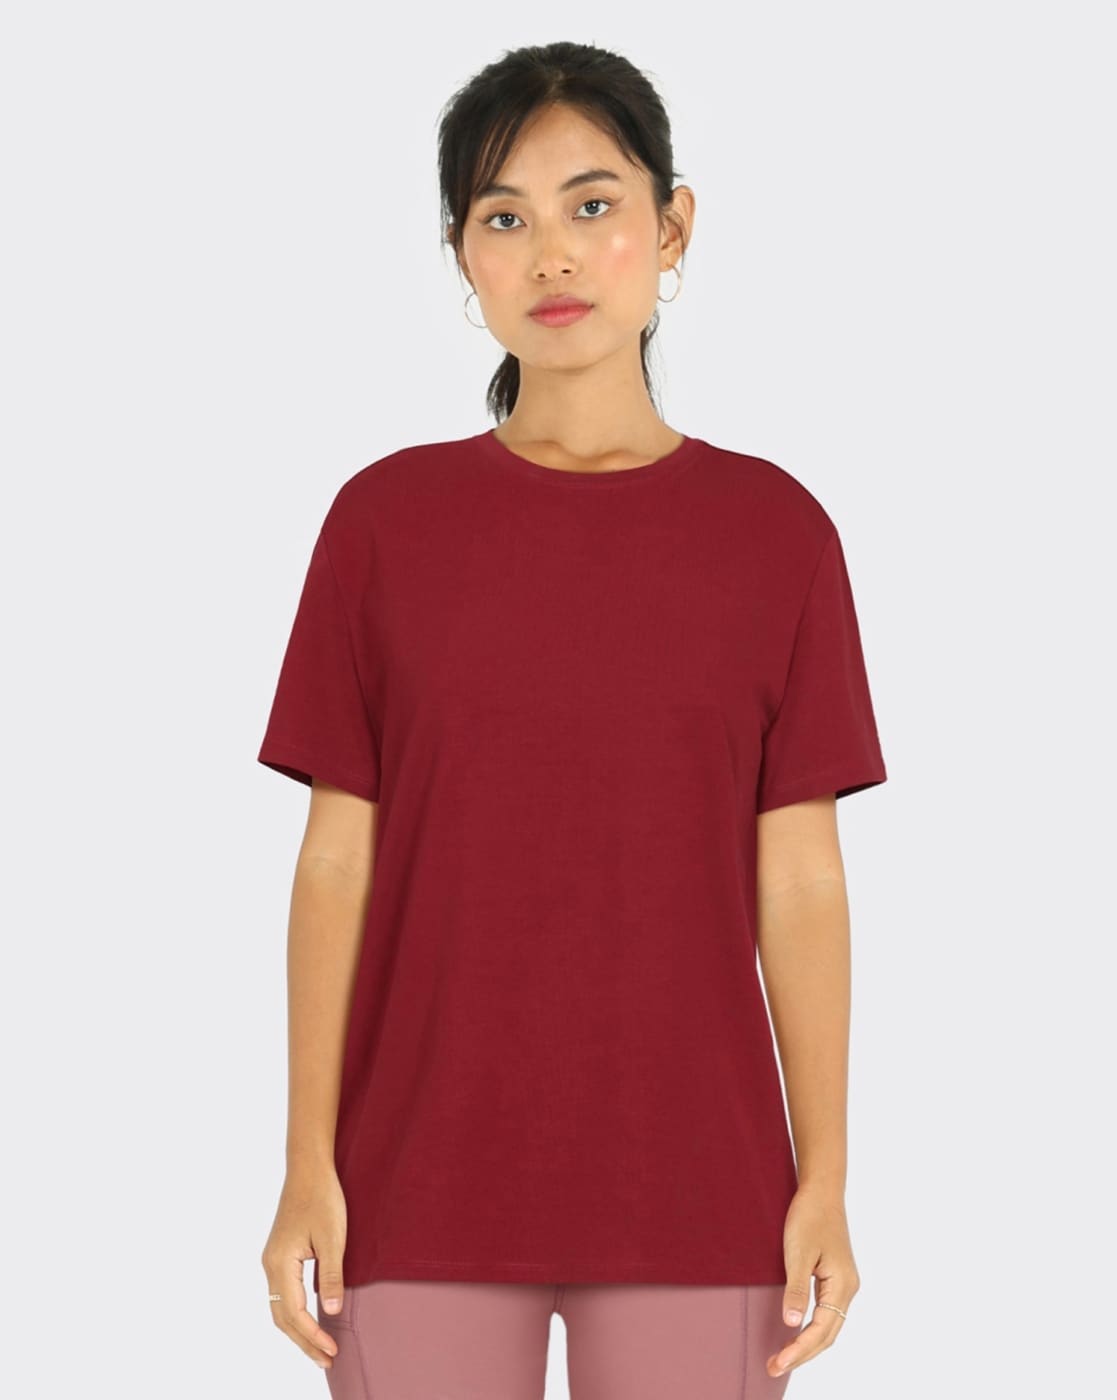 BlissClub Solid Women Round Neck Pink T-Shirt - Buy BlissClub Solid Women  Round Neck Pink T-Shirt Online at Best Prices in India